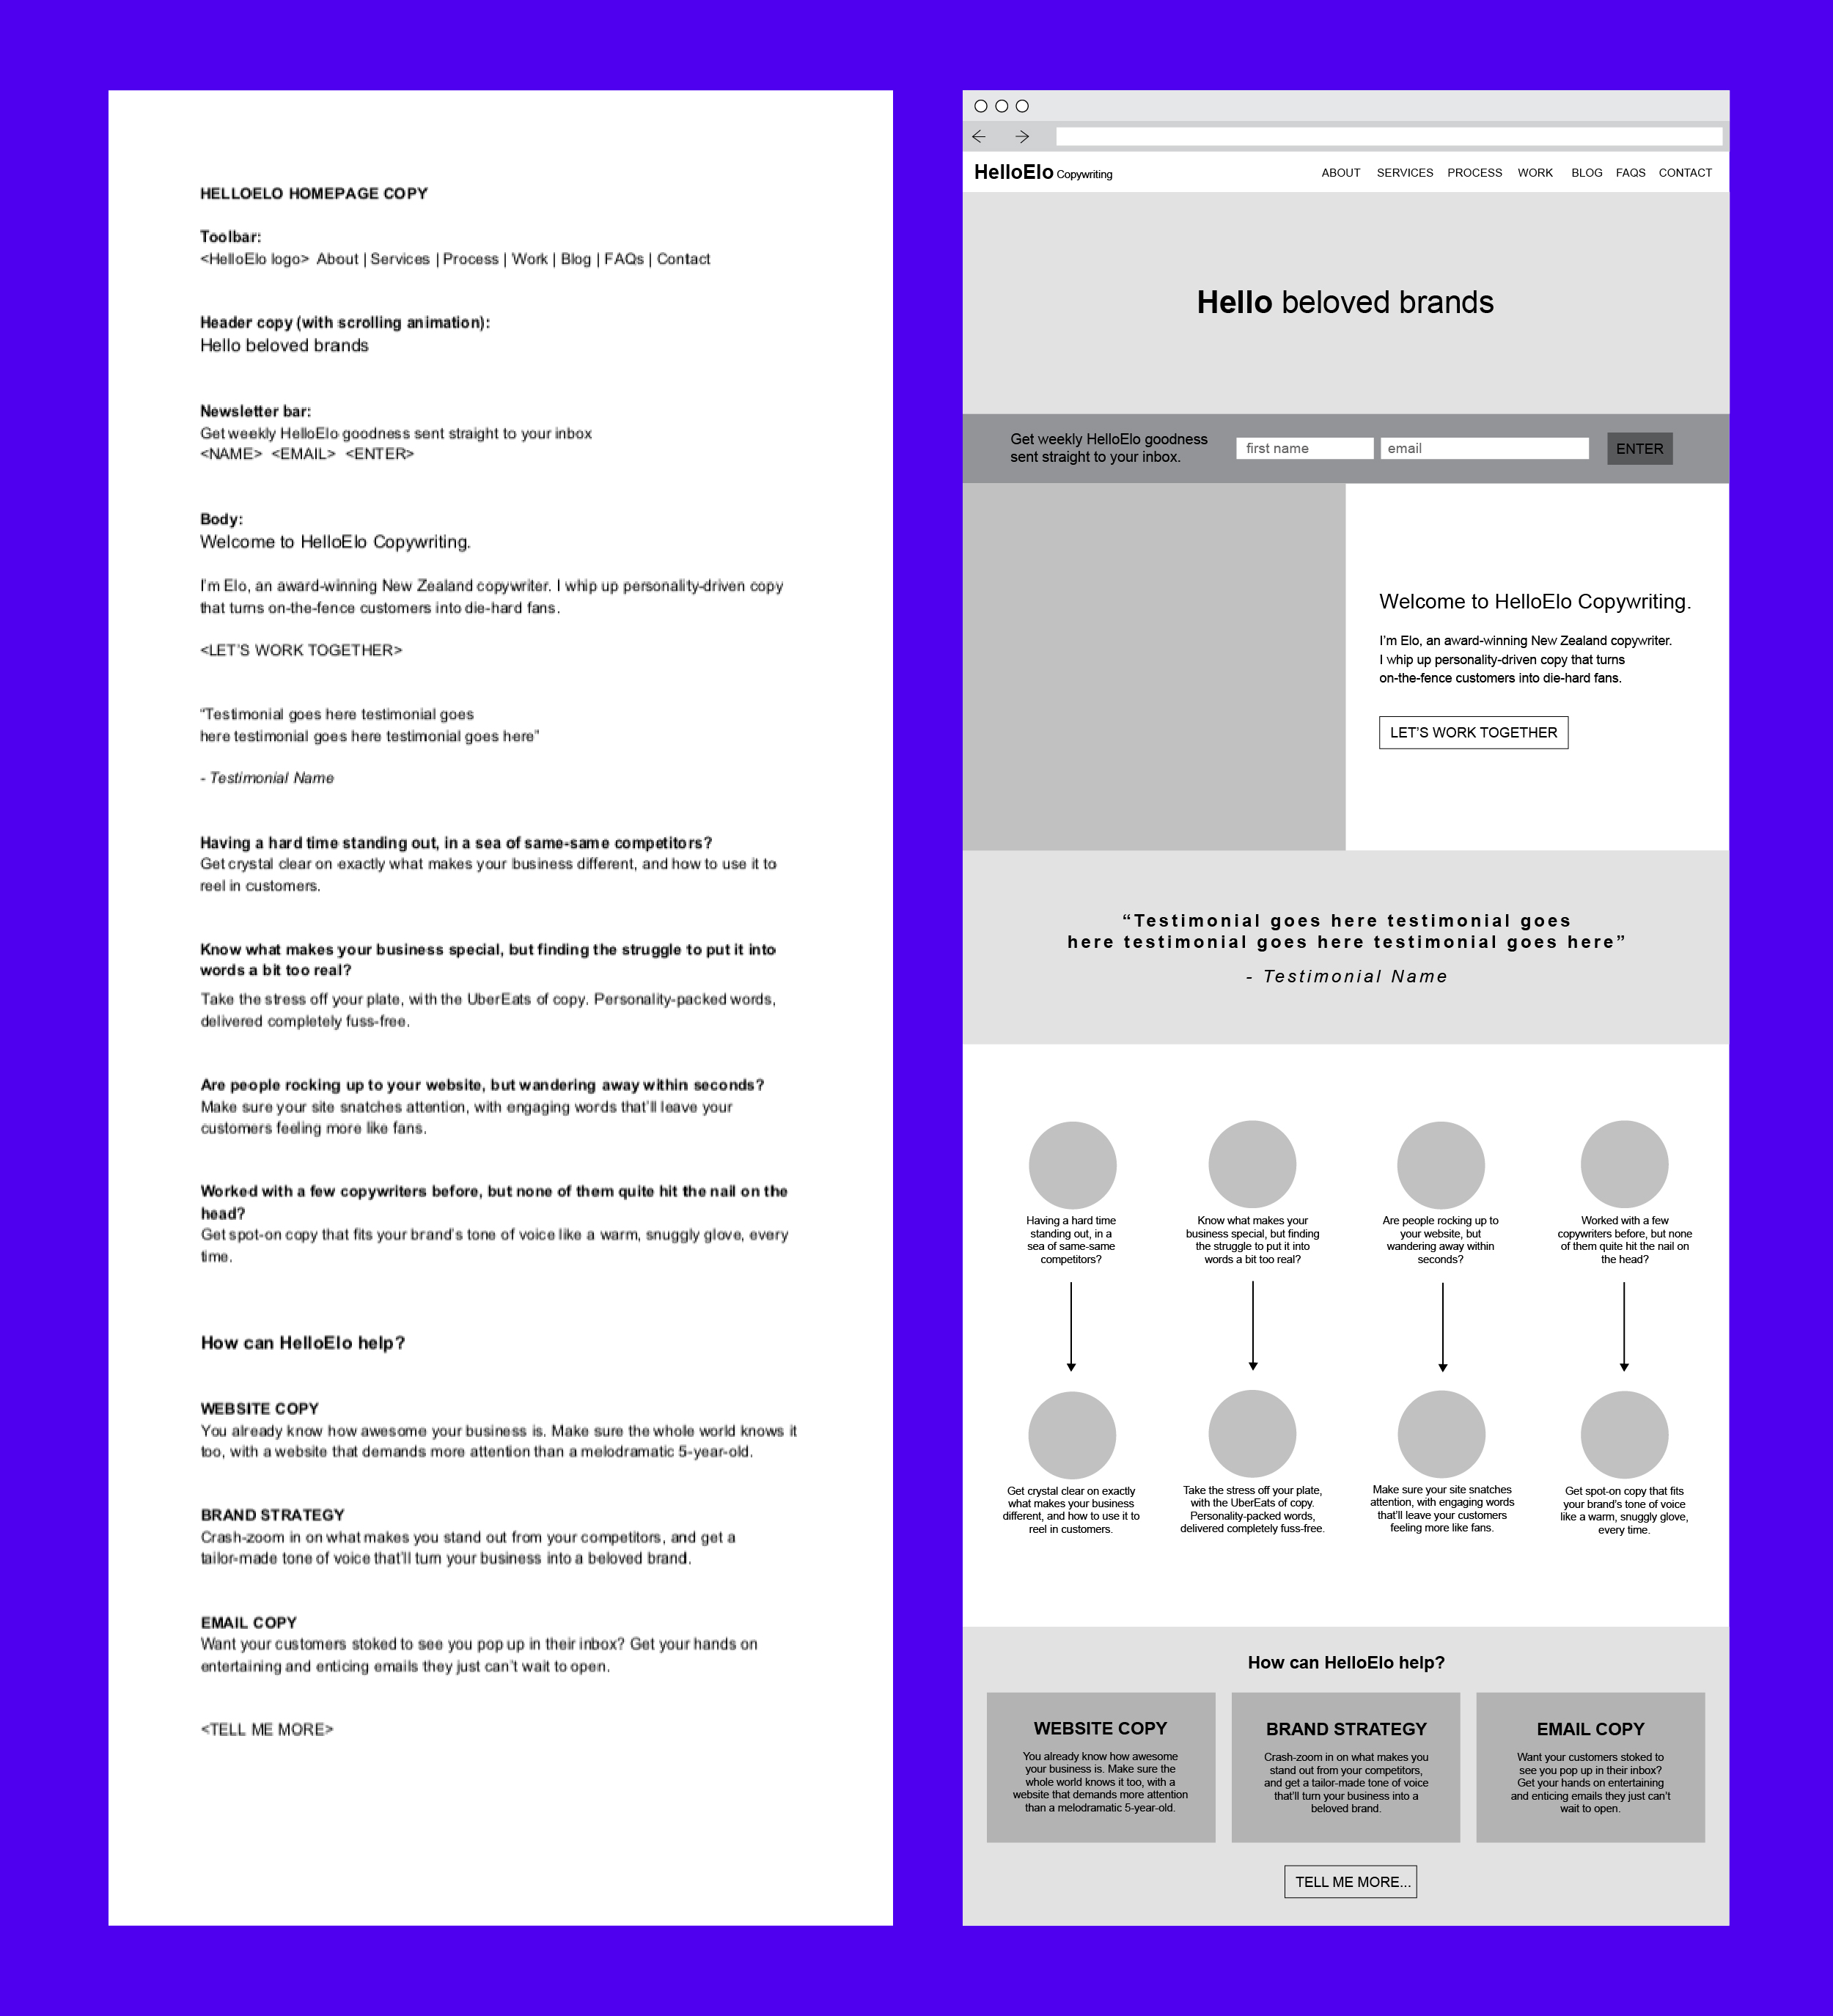 Comparison of word doc copy vs. wireframe copy